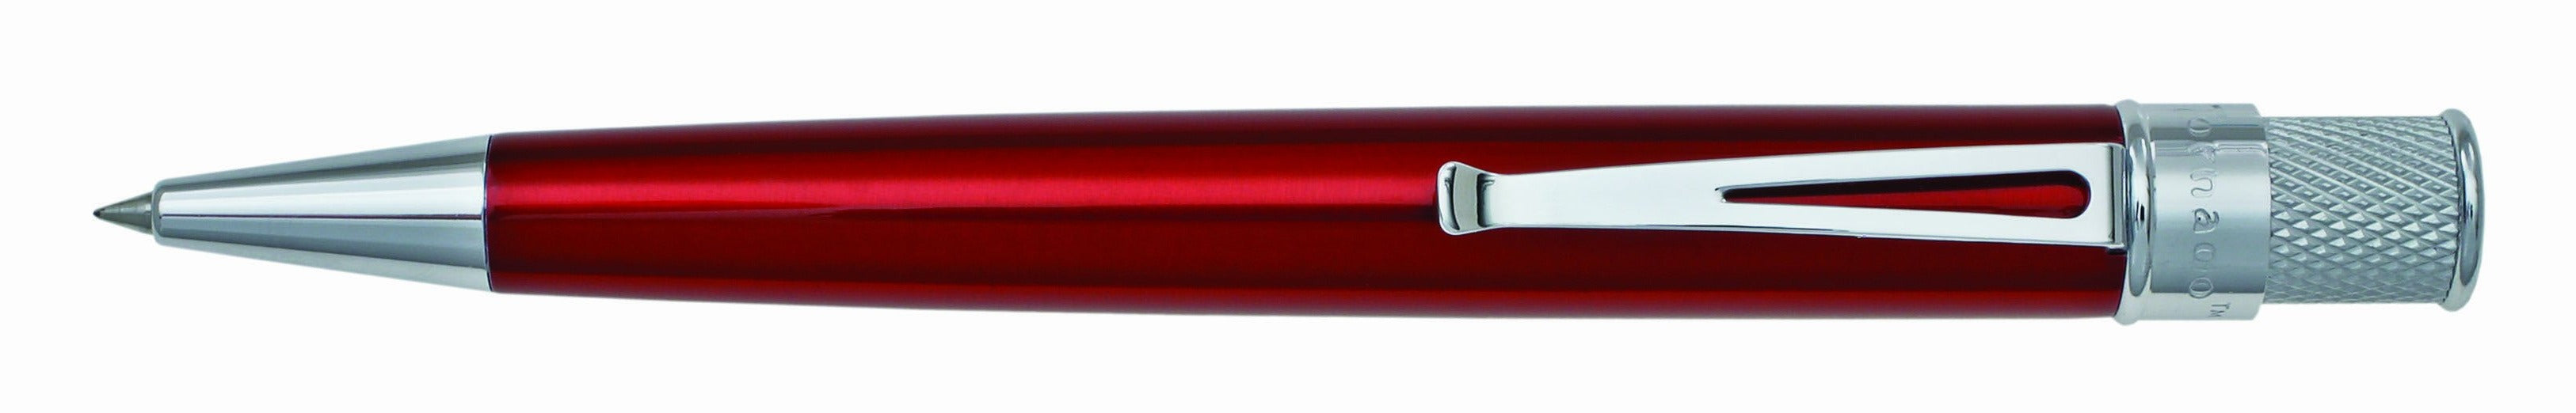 Red stainless steel barrel with vibrant lacquers, knurl twist-top, packaged in pen stand